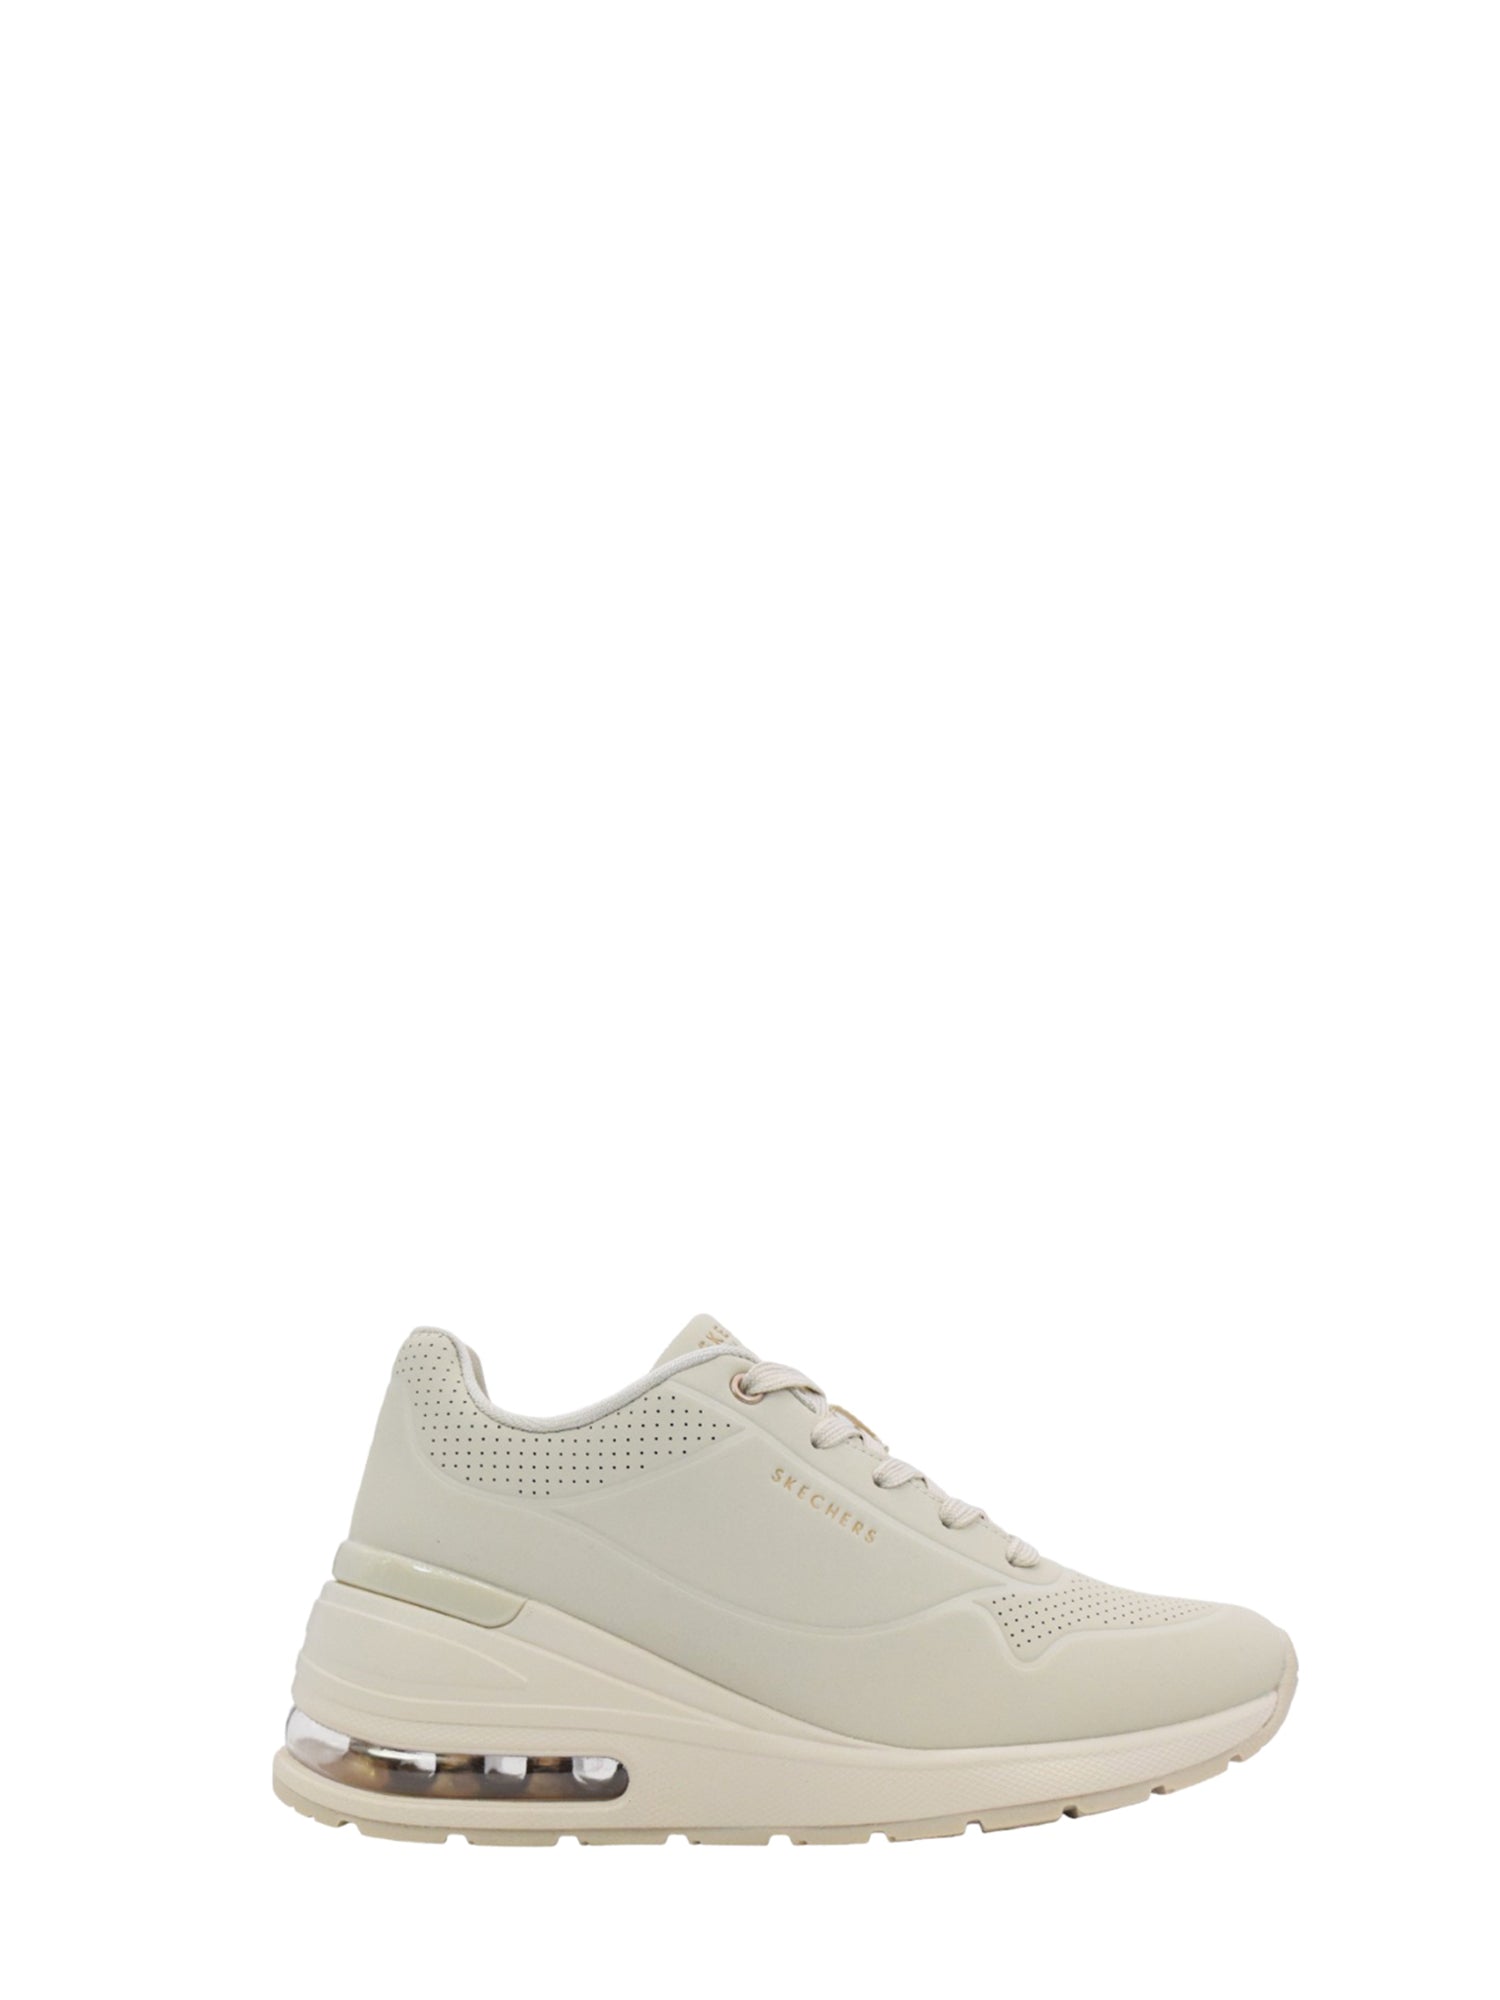 SKECHERS SNEAKERS MILLION AIR - ELEVATED AIR BIANCO SPORCO